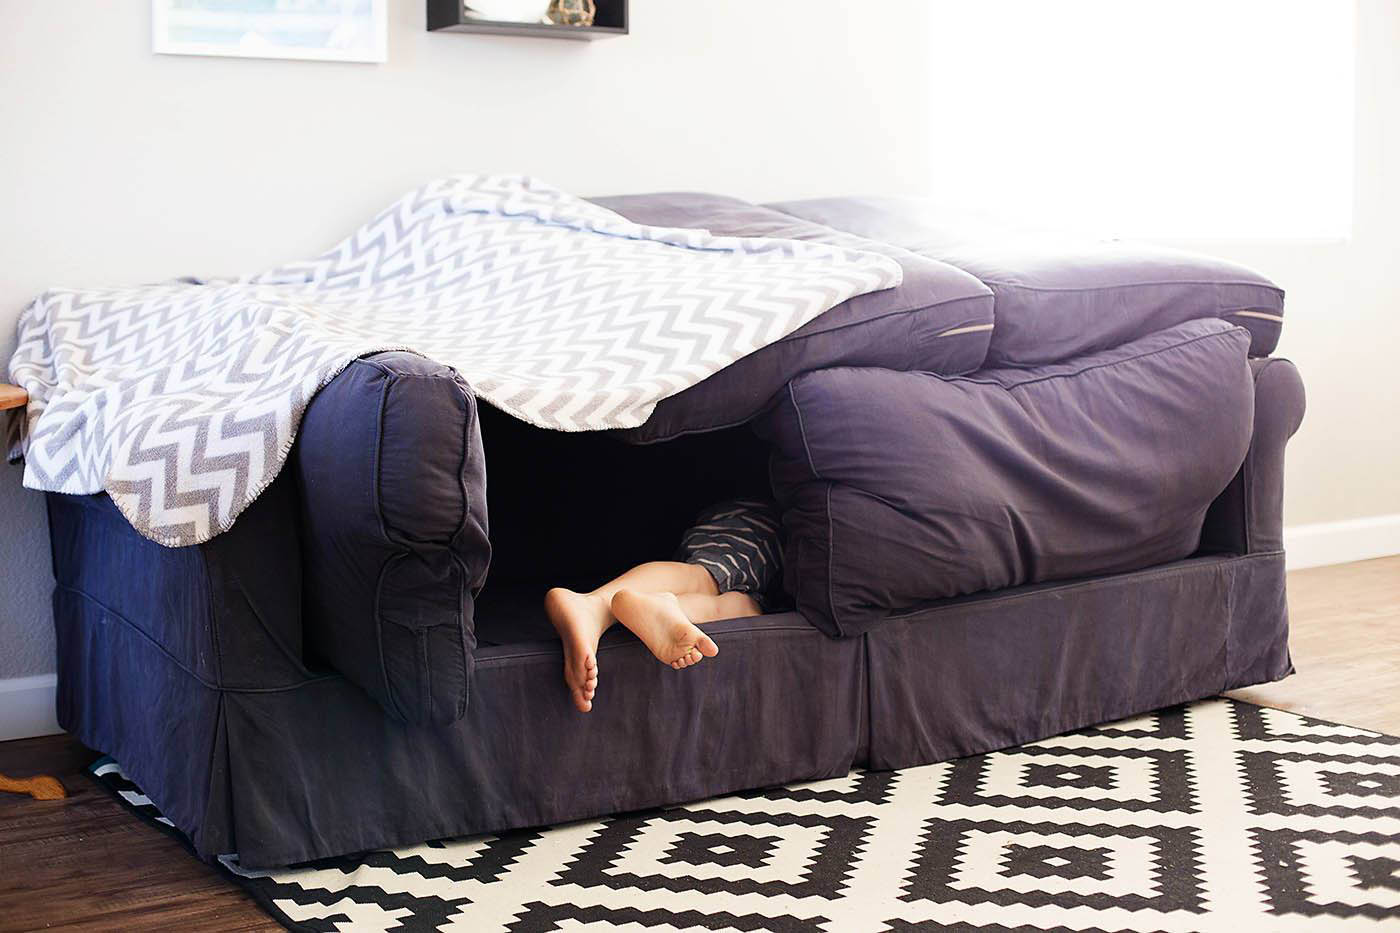 7 of Our Favorite Fort Building Tips — All for the Boys